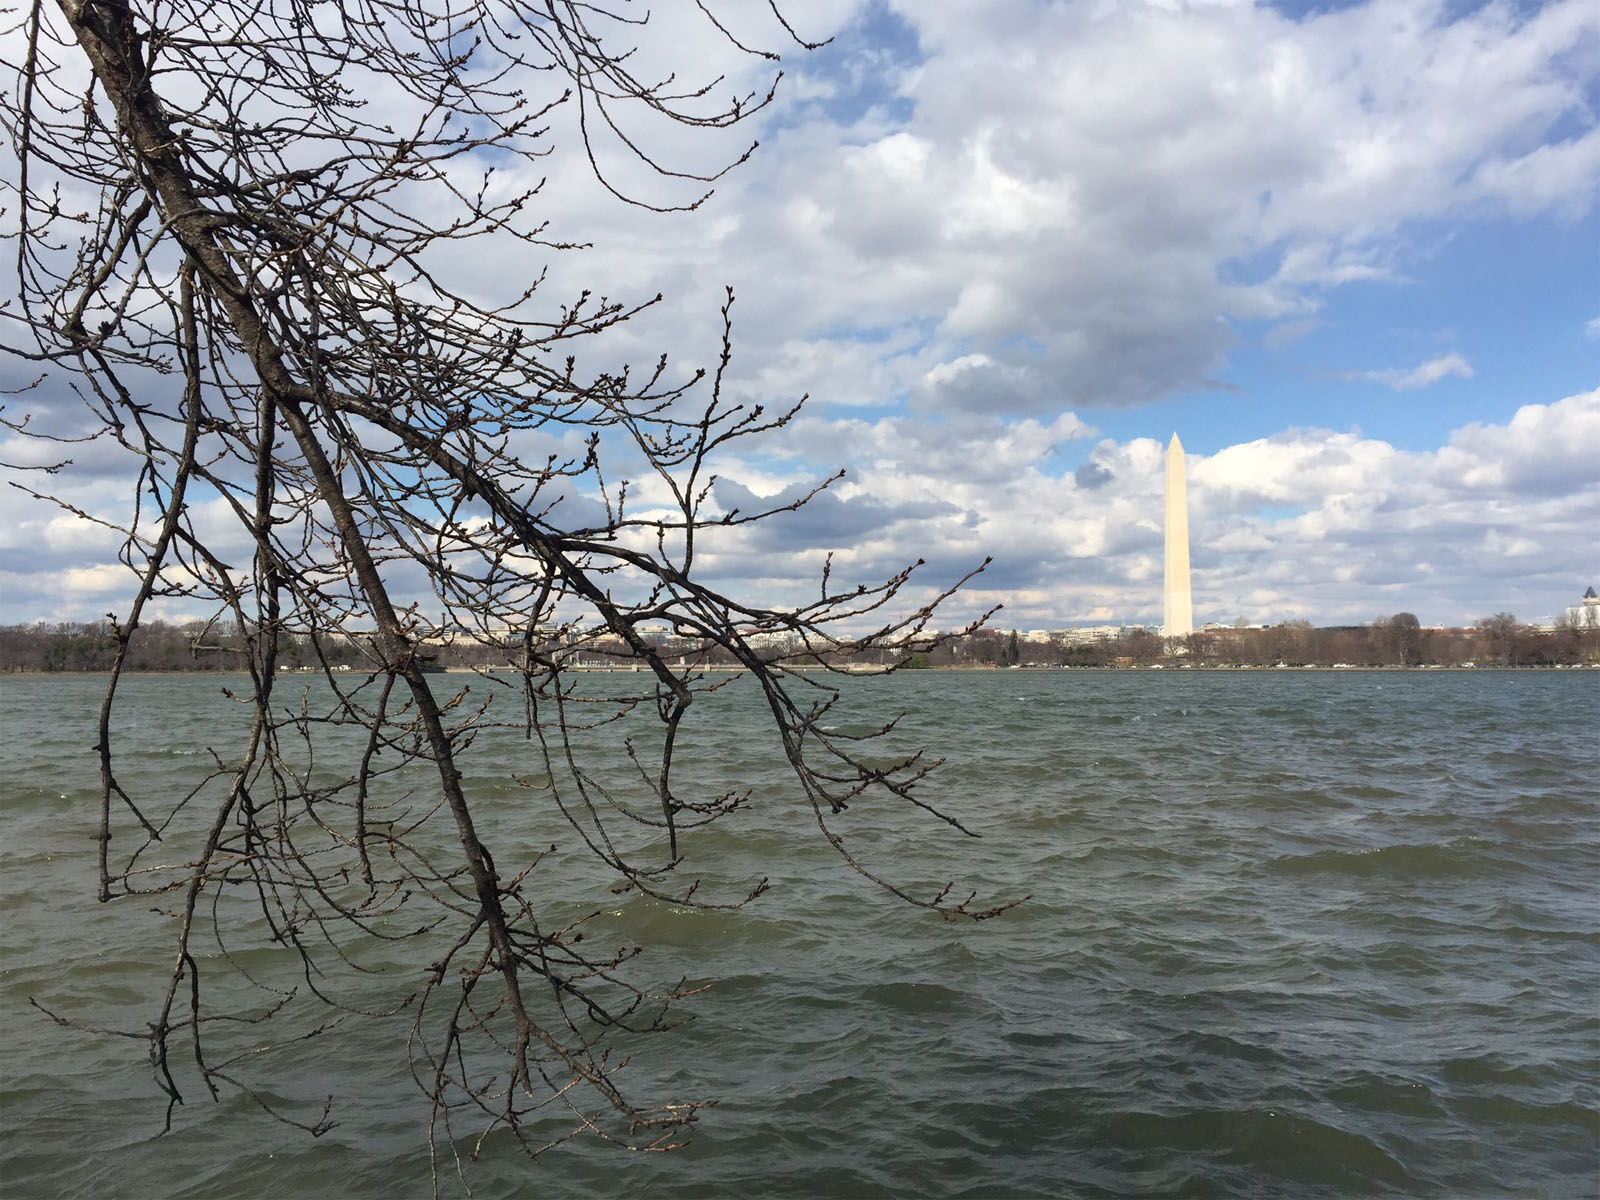 There was no sign of green on the buds of the cherry trees along the Tidal Basin near the Jefferson Memorial Feb. 15. (WTOP/Michelle Basch)